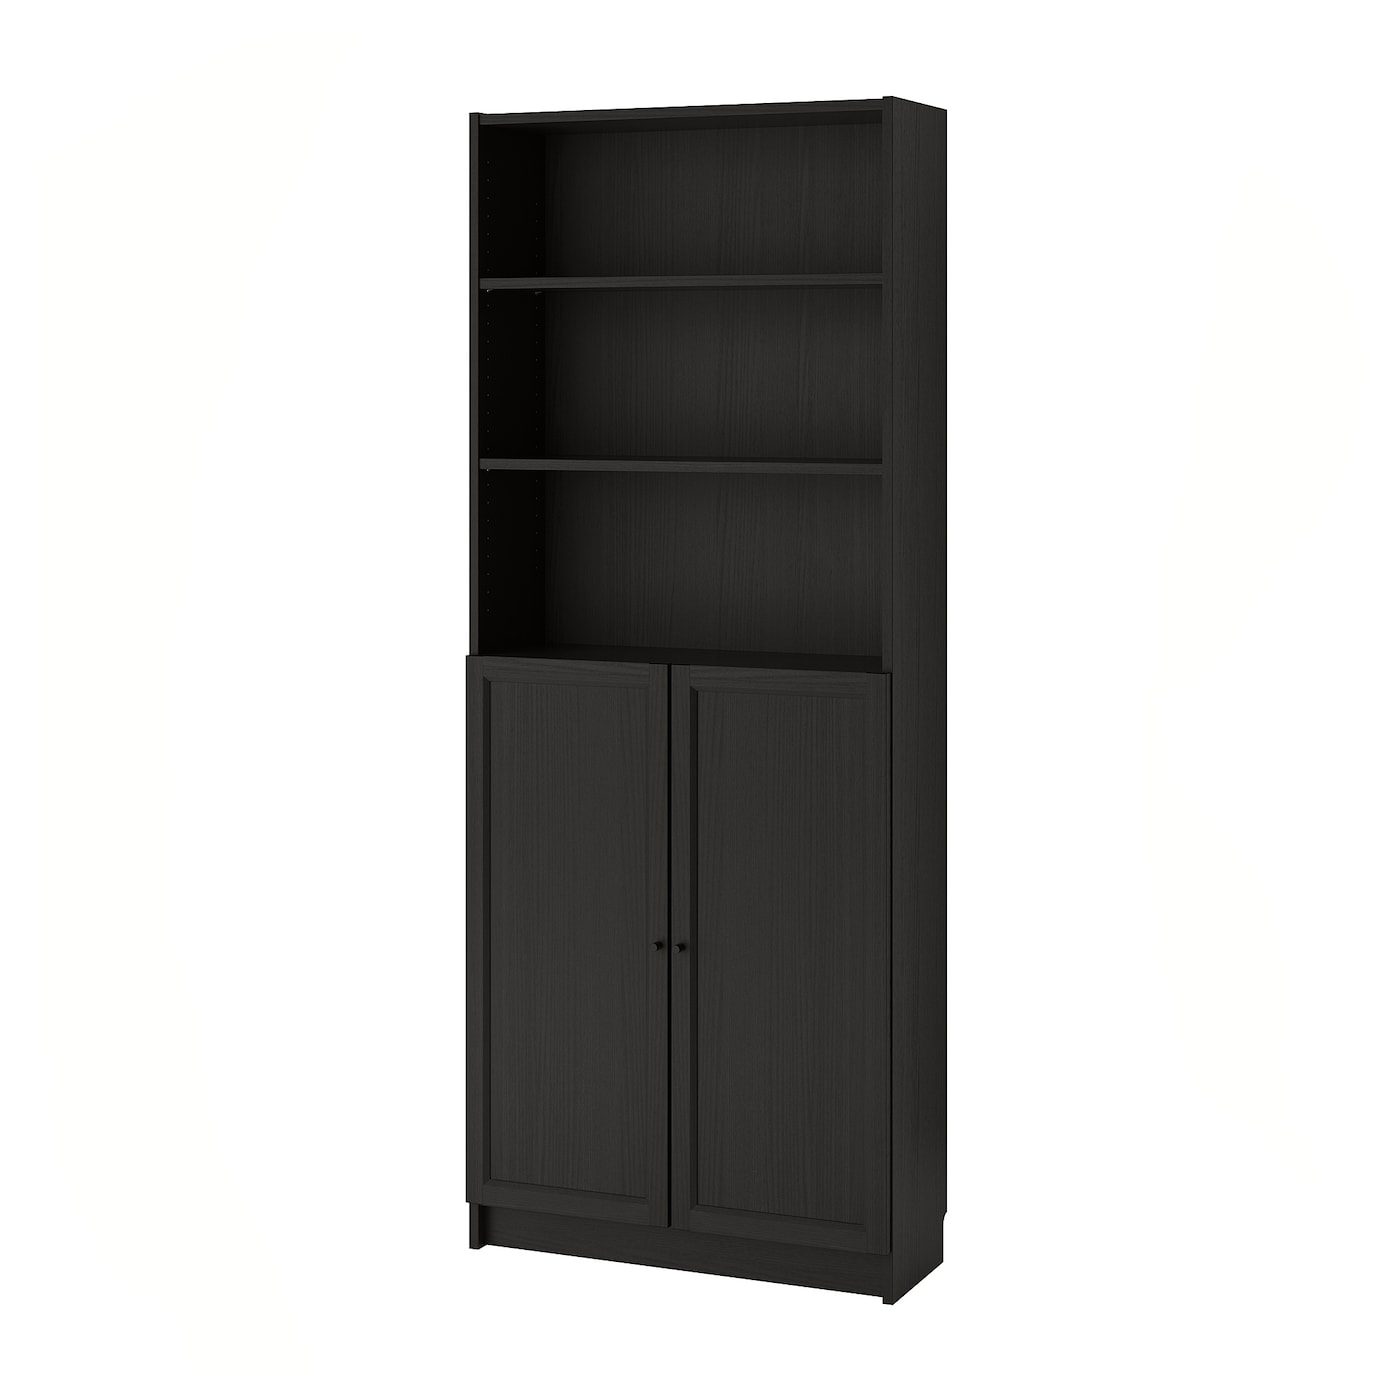 Details on Using a Billy Oxberg Bookcase for Storage, Plus One